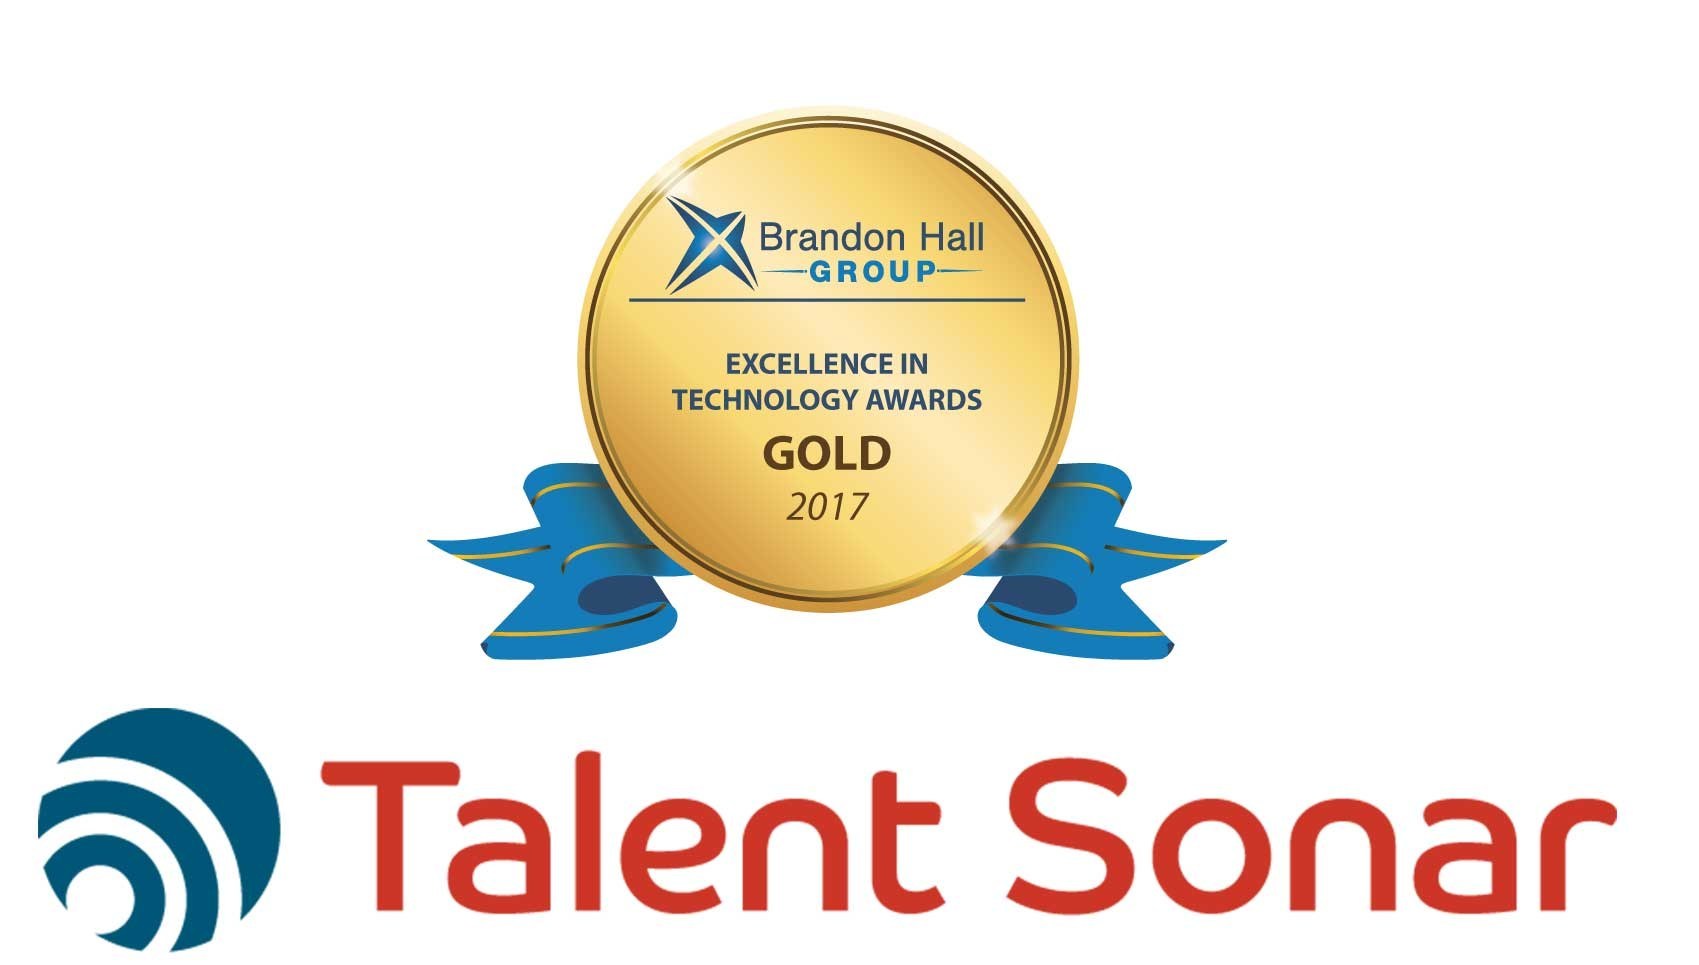 Talent Sonar Wins Gold Brandon Hall Excellence in Technology Award